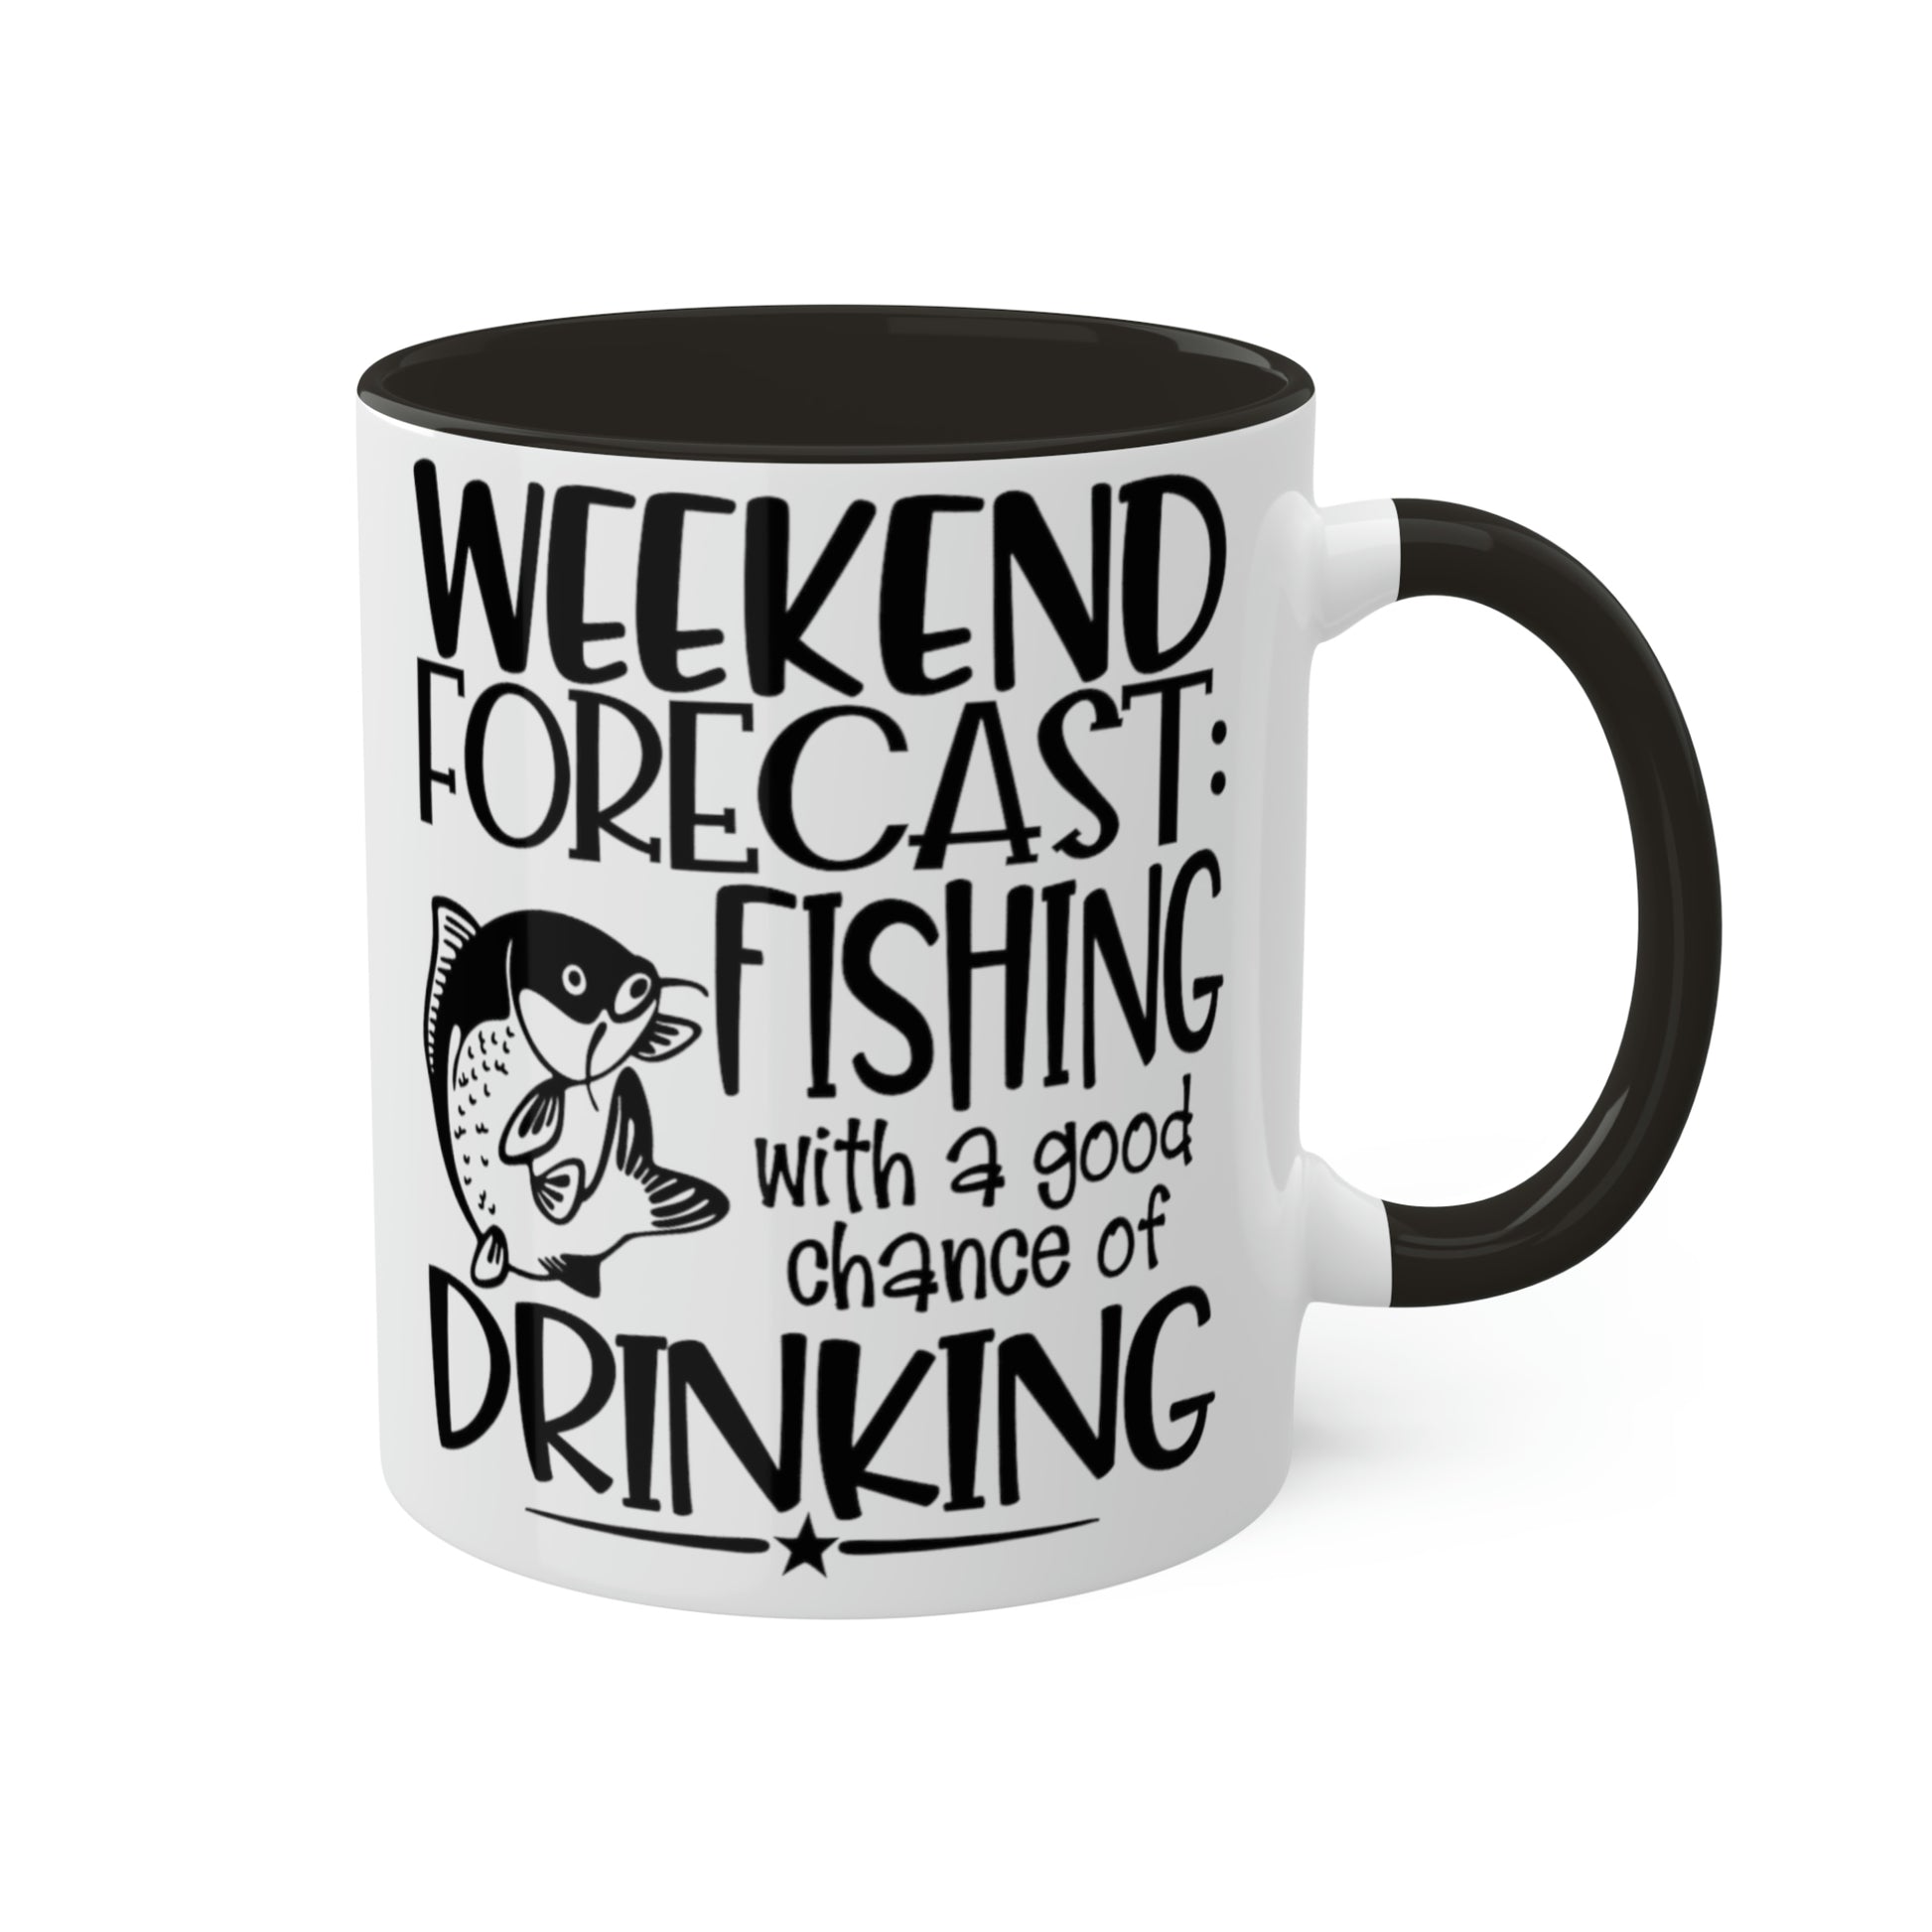 weekend-forecast-fishing-with-a-good-chance-of-drinking-glossy-mug-11-oz-orca-coating-right-side